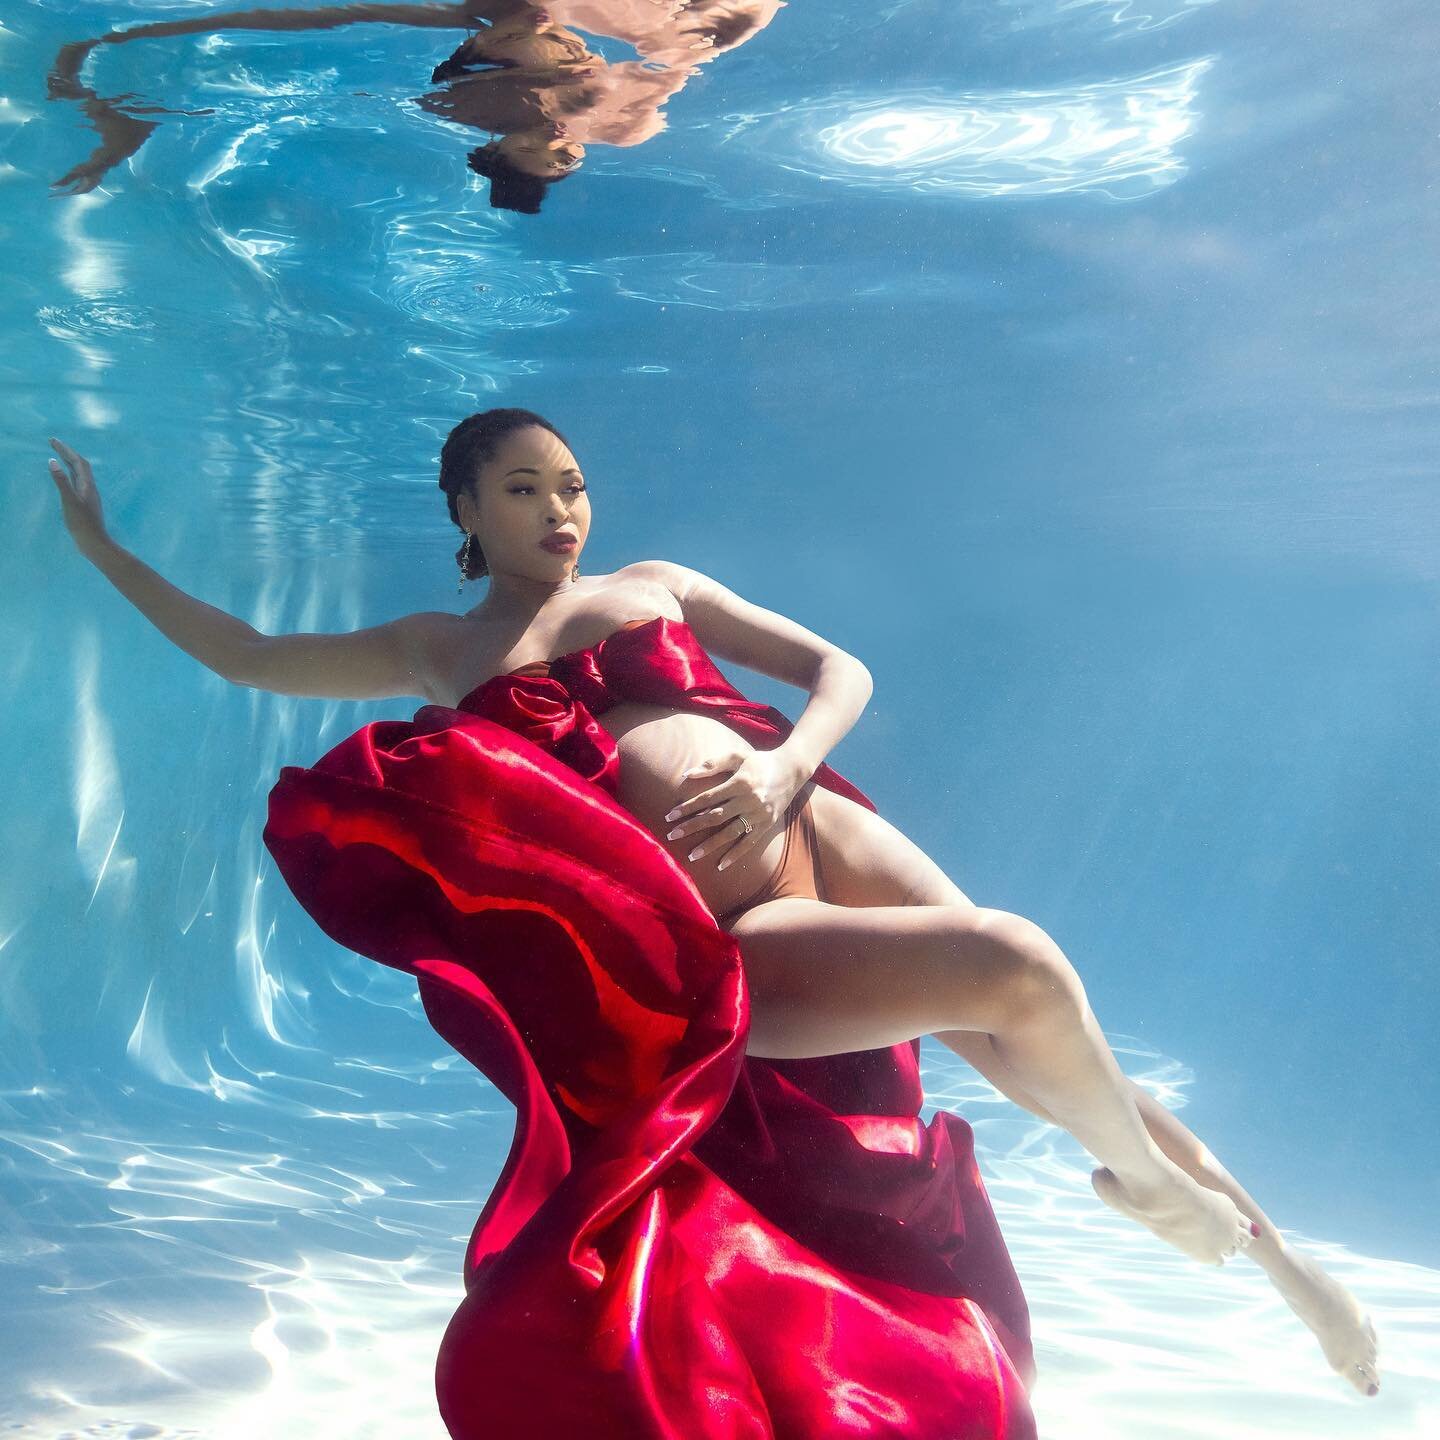 This sweet gift came wrapped in a red bow ❤️
.
.
.
#maternityshoot #maternityphotography #pregancyphoto #pregnant #pregnancyannouncement #pregnantbelly #reddress #blackmomskillingit #underwatermaternity #underwaterpregnancy #underwaterphotography #un